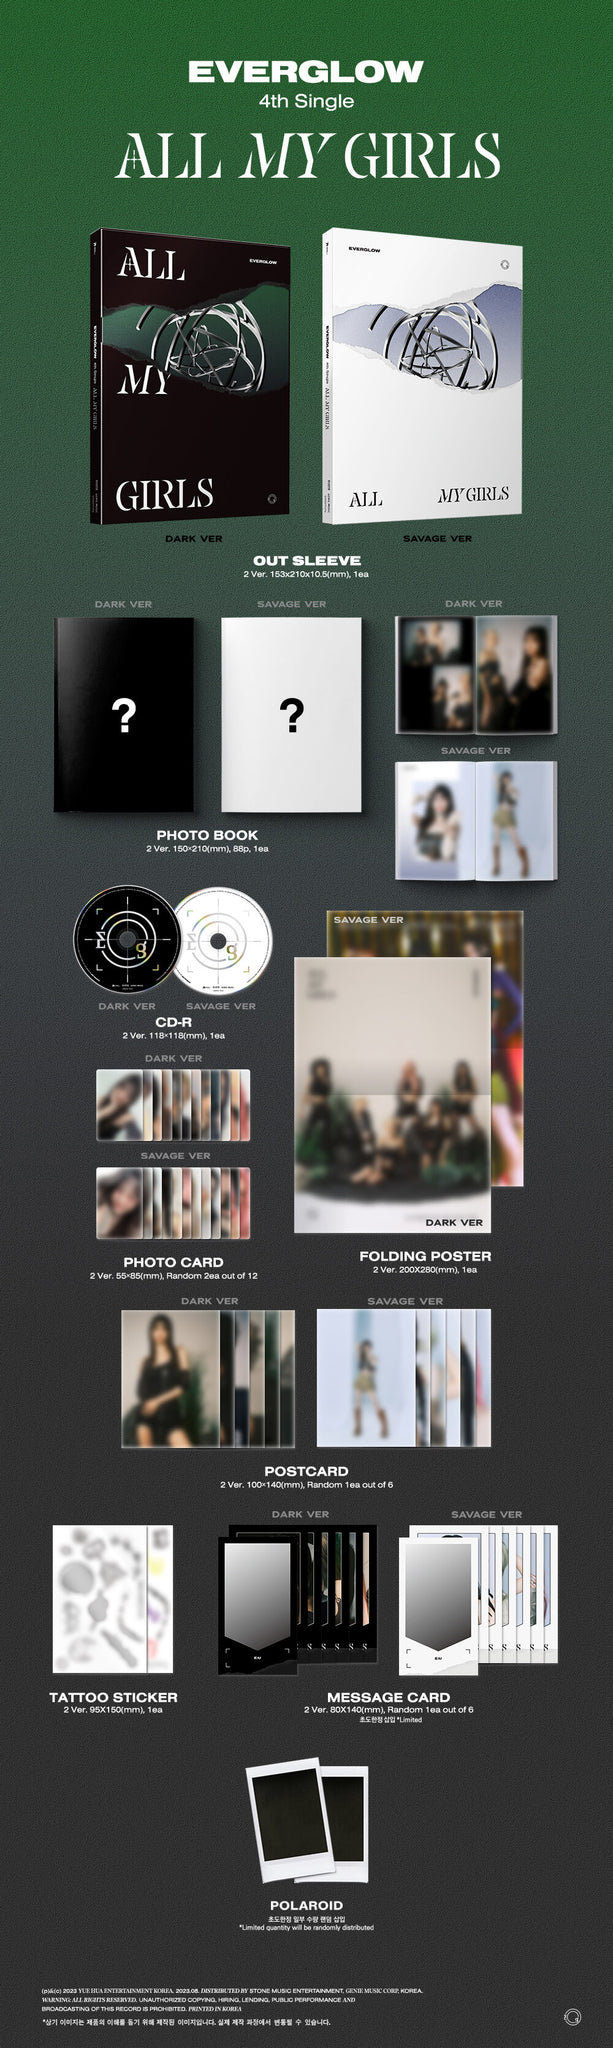 EVERGLOW ALL MY GIRLS Inclusions Out Sleeve Photobook CD Photocards Postcard Tattoo Sticker Folding Poster 1st Press Only Message Card Polaroid